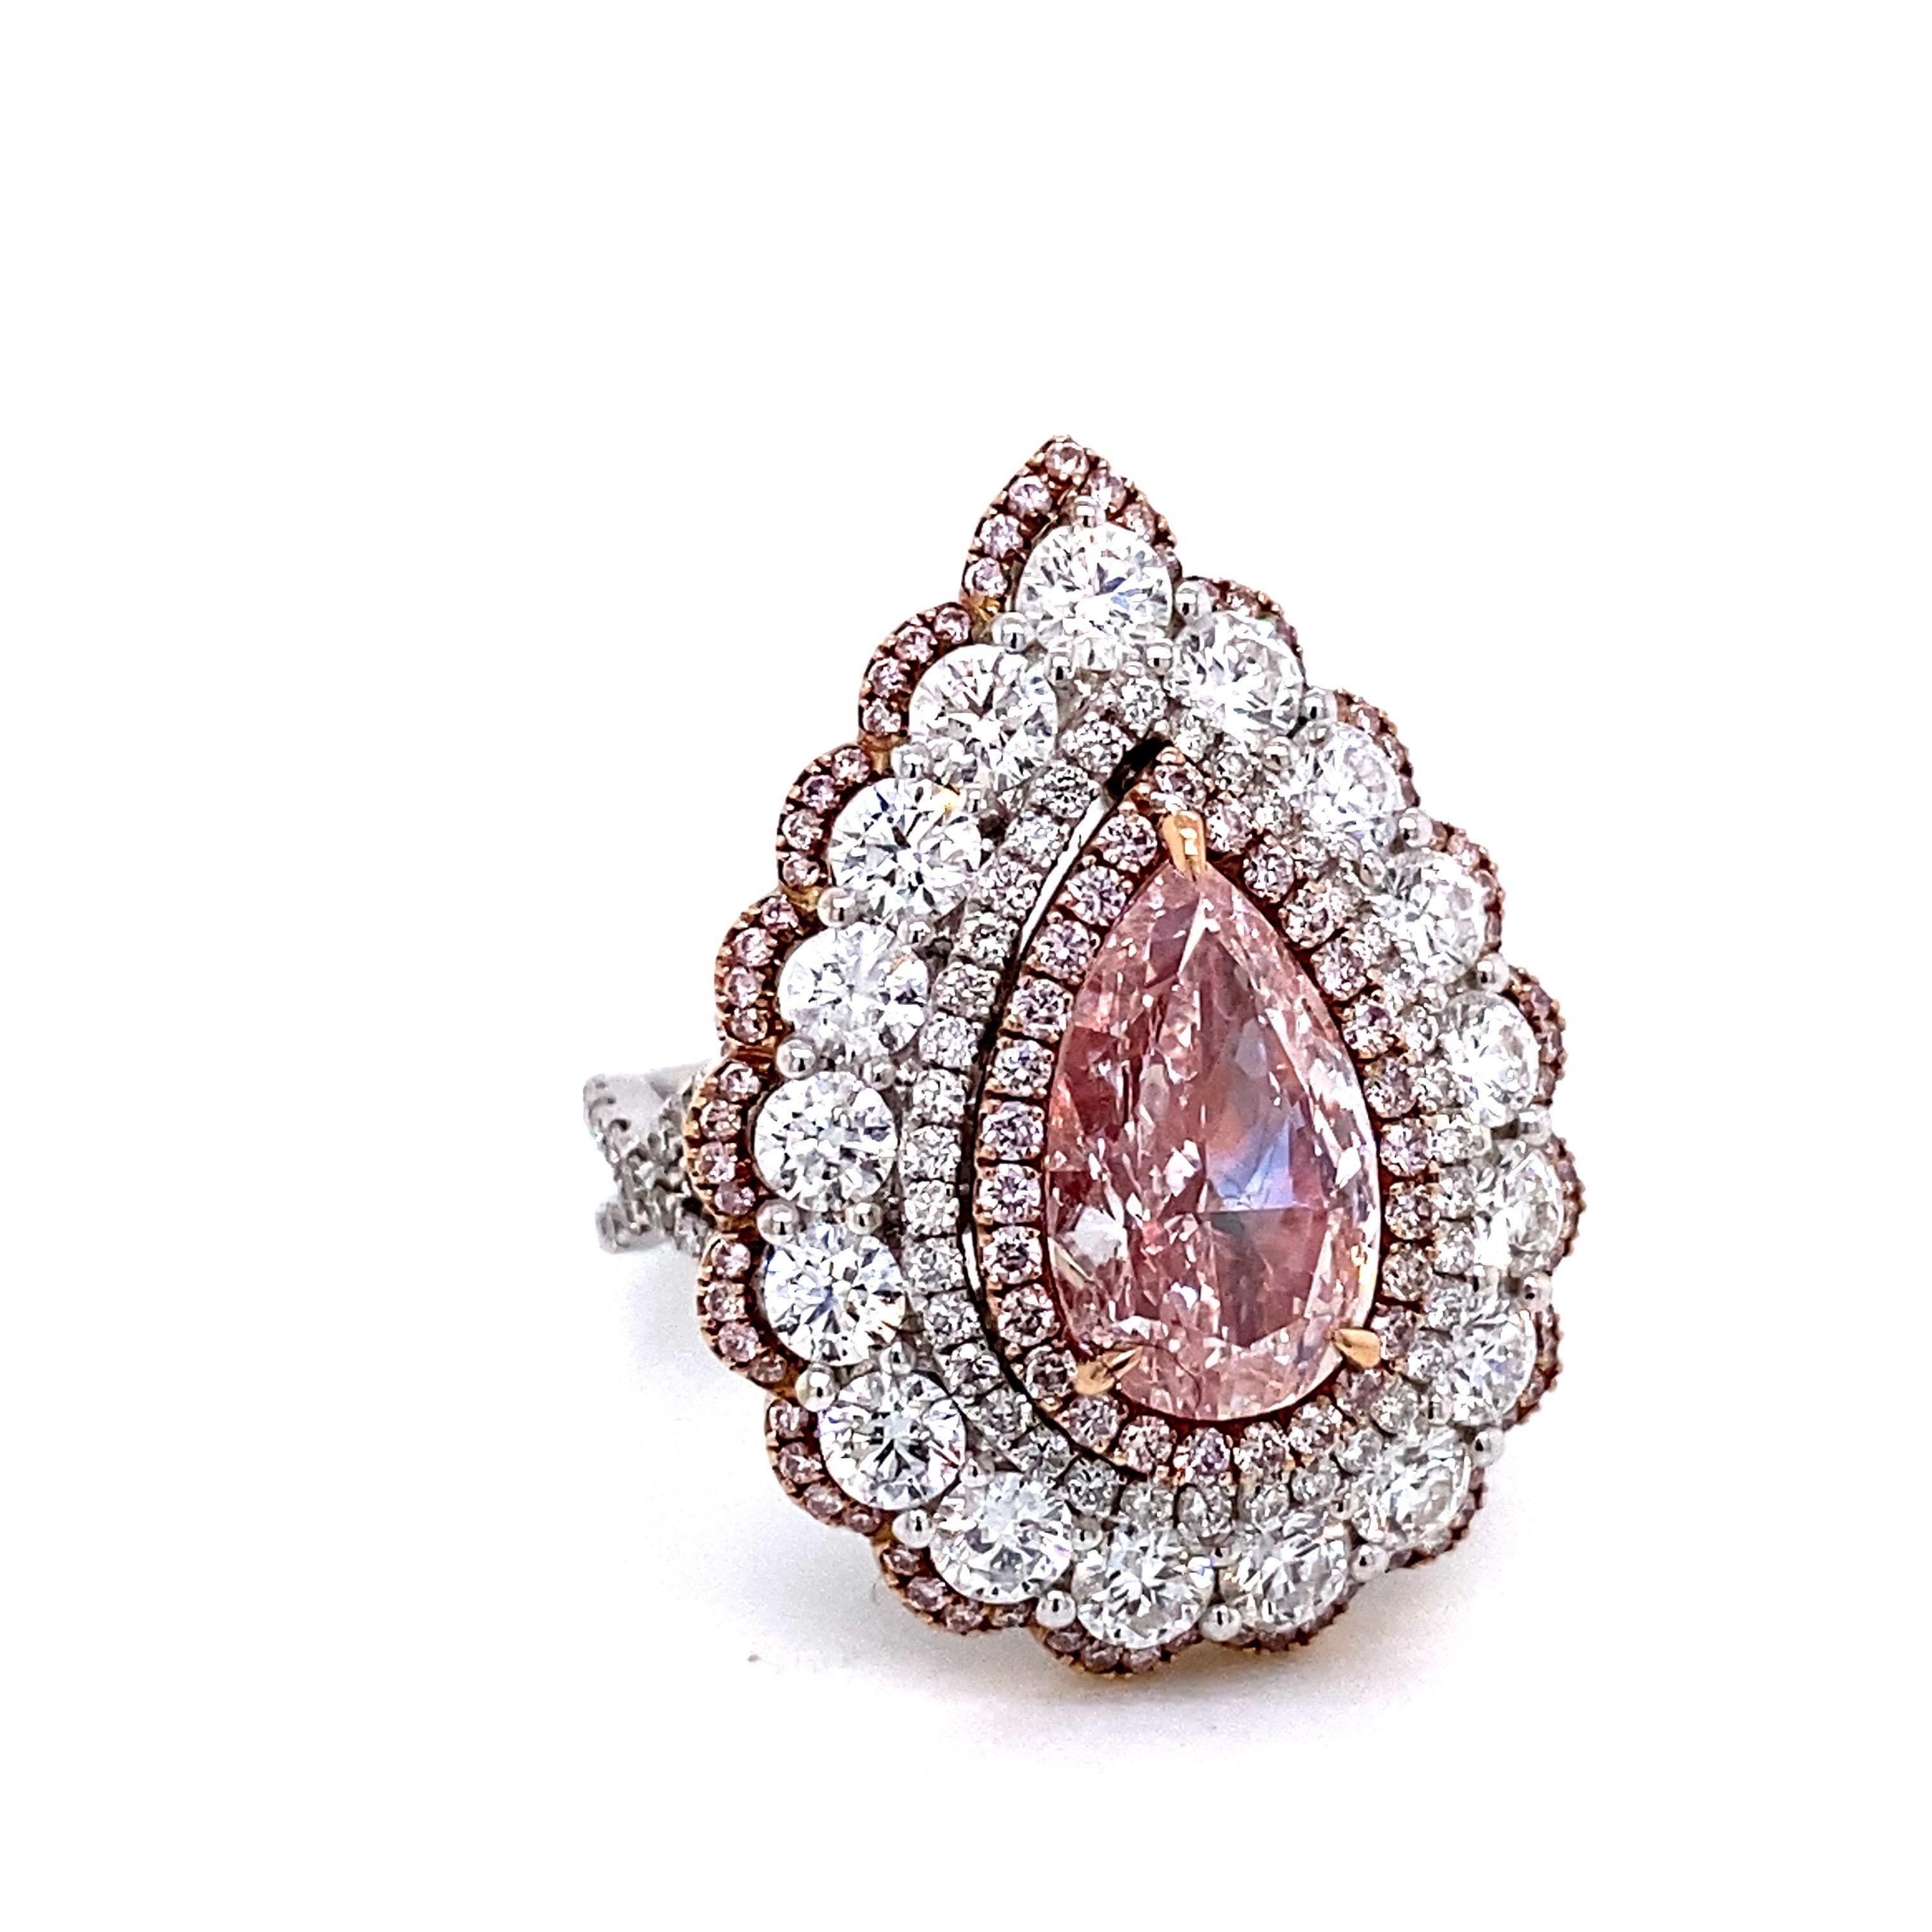 From The Museum Vault At Emilio Jewelry New York,
A magical ring which converts into a pendant!  Emilio Jewelry created this magnificent mounting, to bring out the very best potential of this very  rare pink diamond which after setting in our